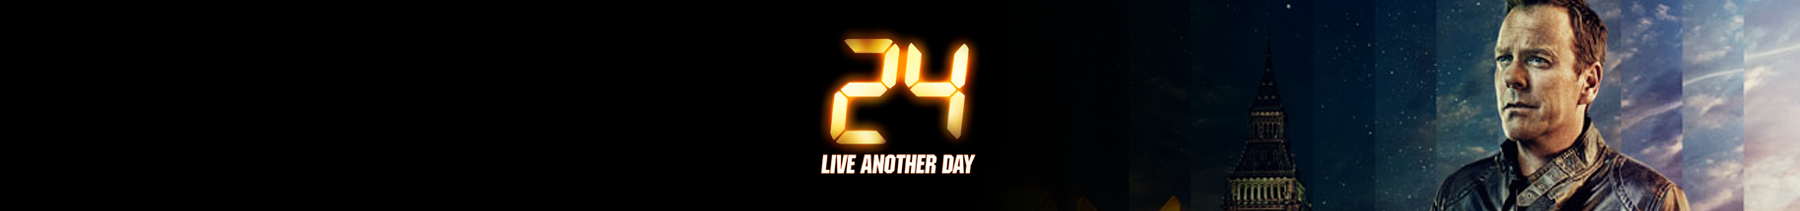 24 live another days